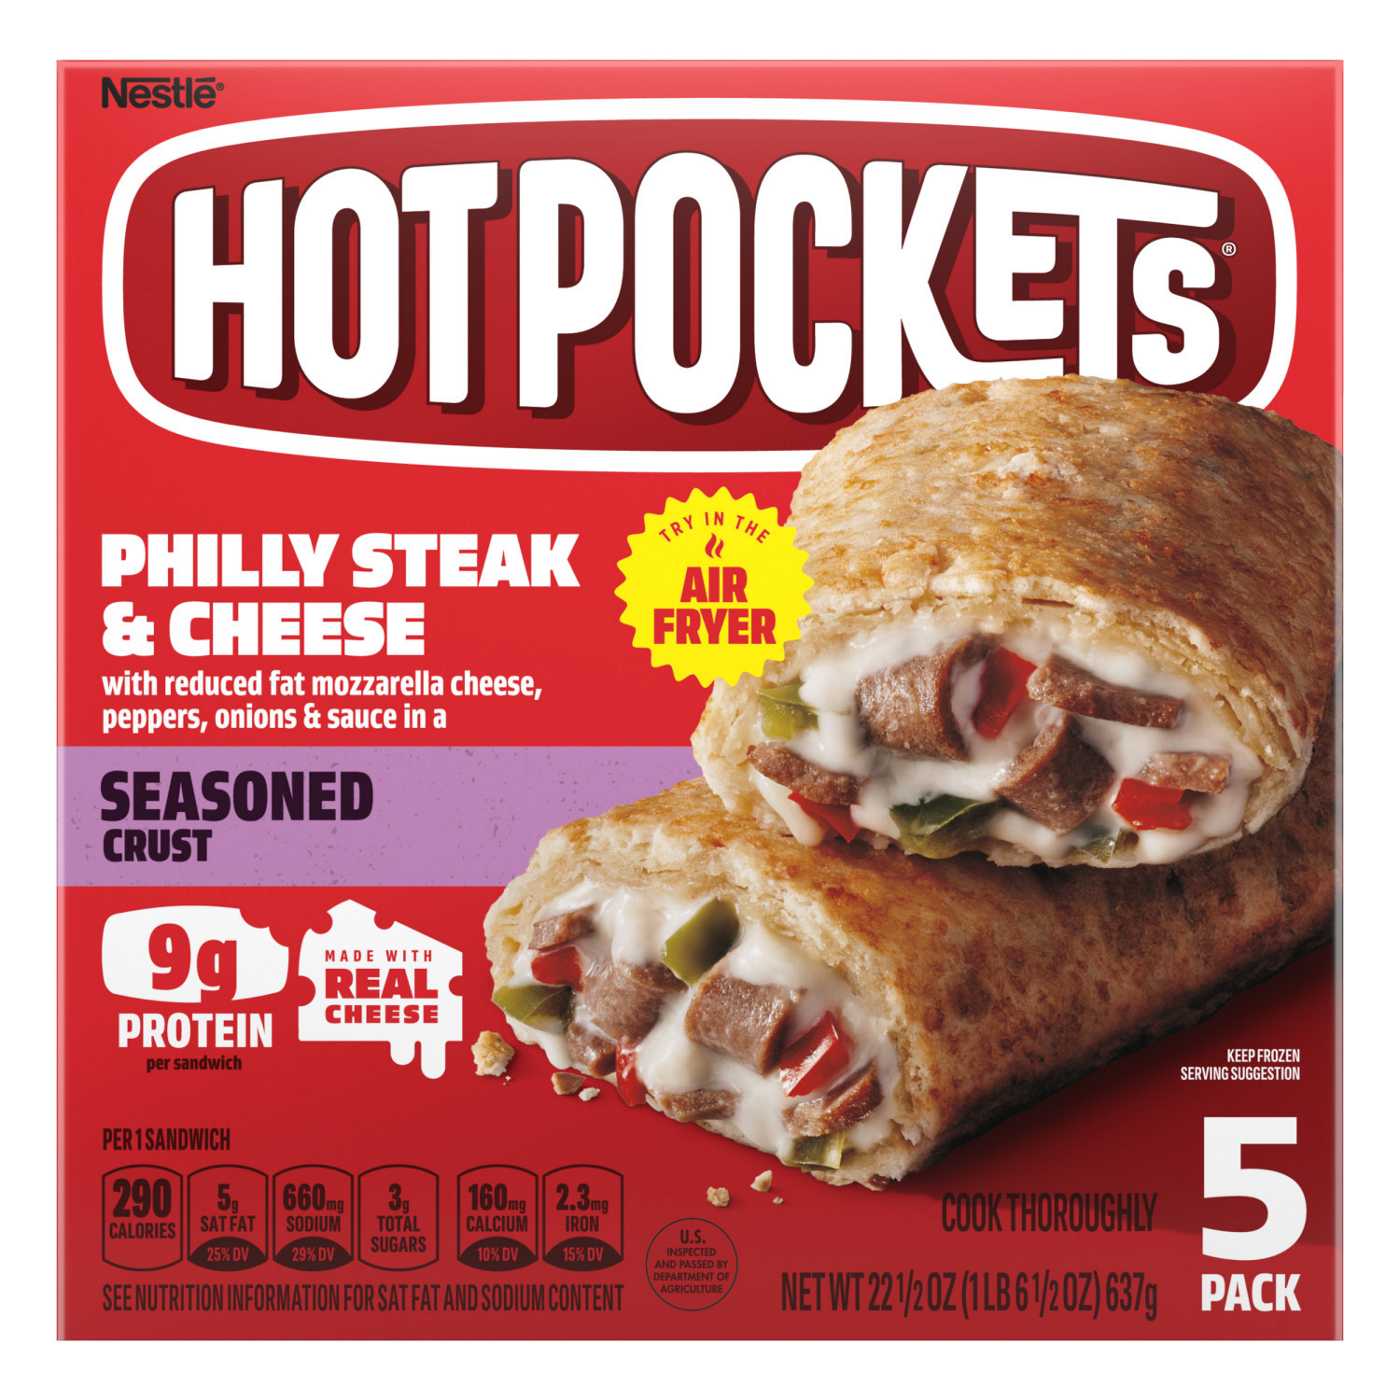 Hot Pockets Philly Steak & Cheese Frozen Sandwiches - Seasoned Crust; image 1 of 7